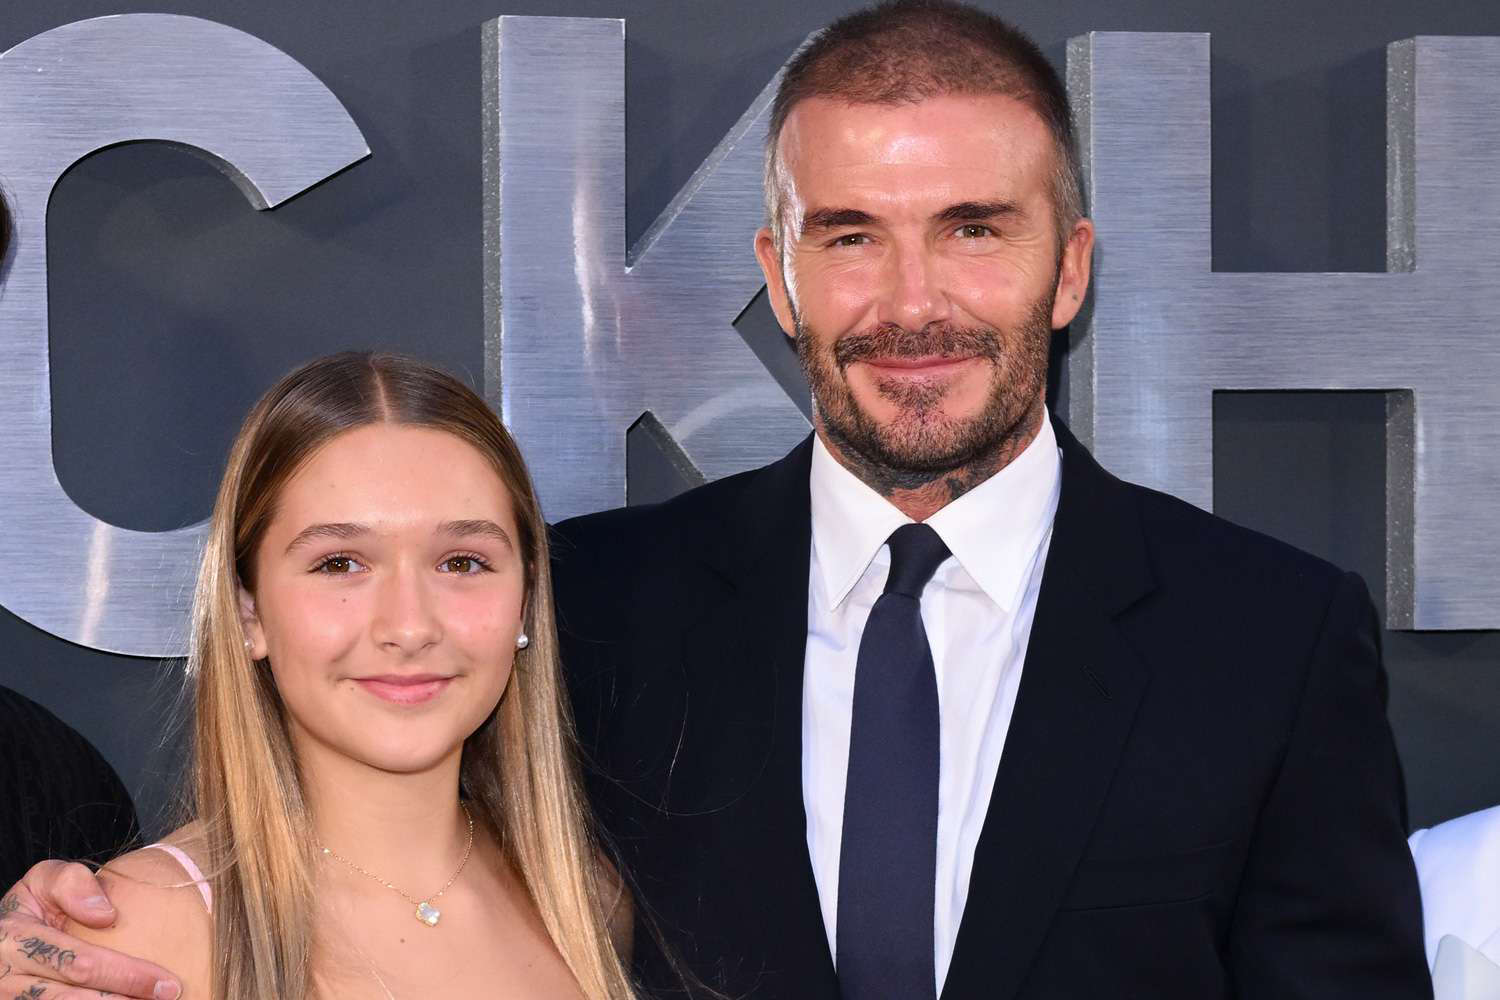 David Beckham Shares Wholesome Moment with Daughter Harper at Inter ...